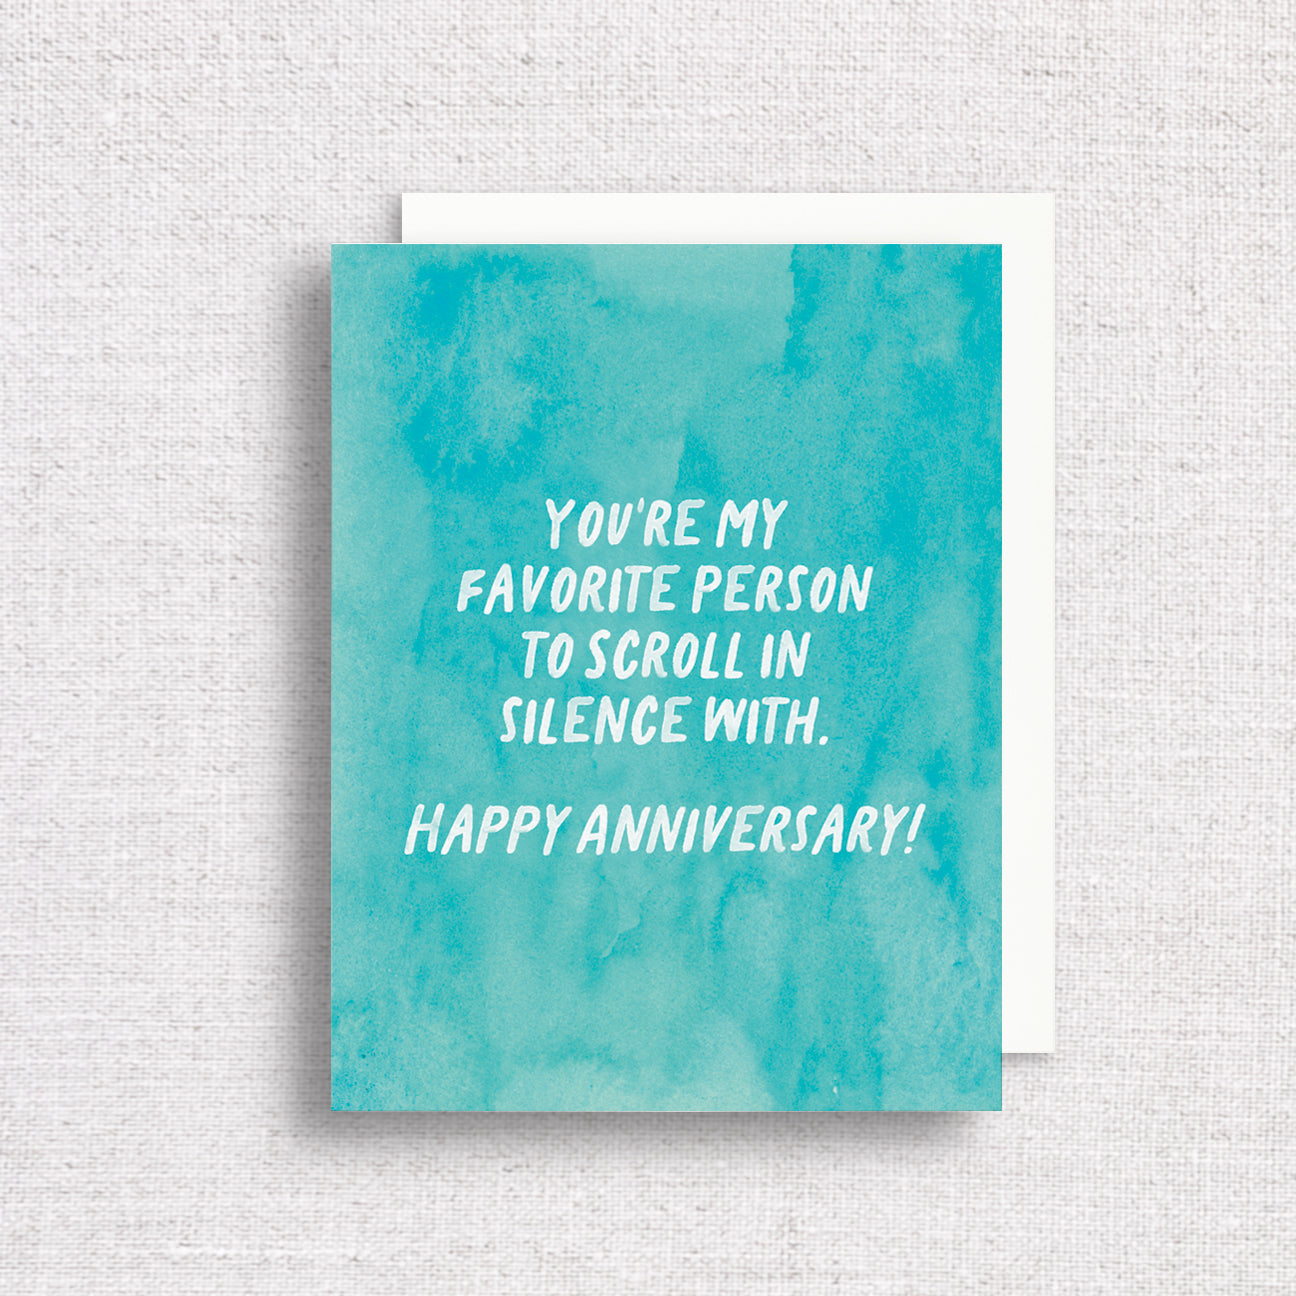 You're My Favorite to Scroll With Greeting Card by Gert & Co